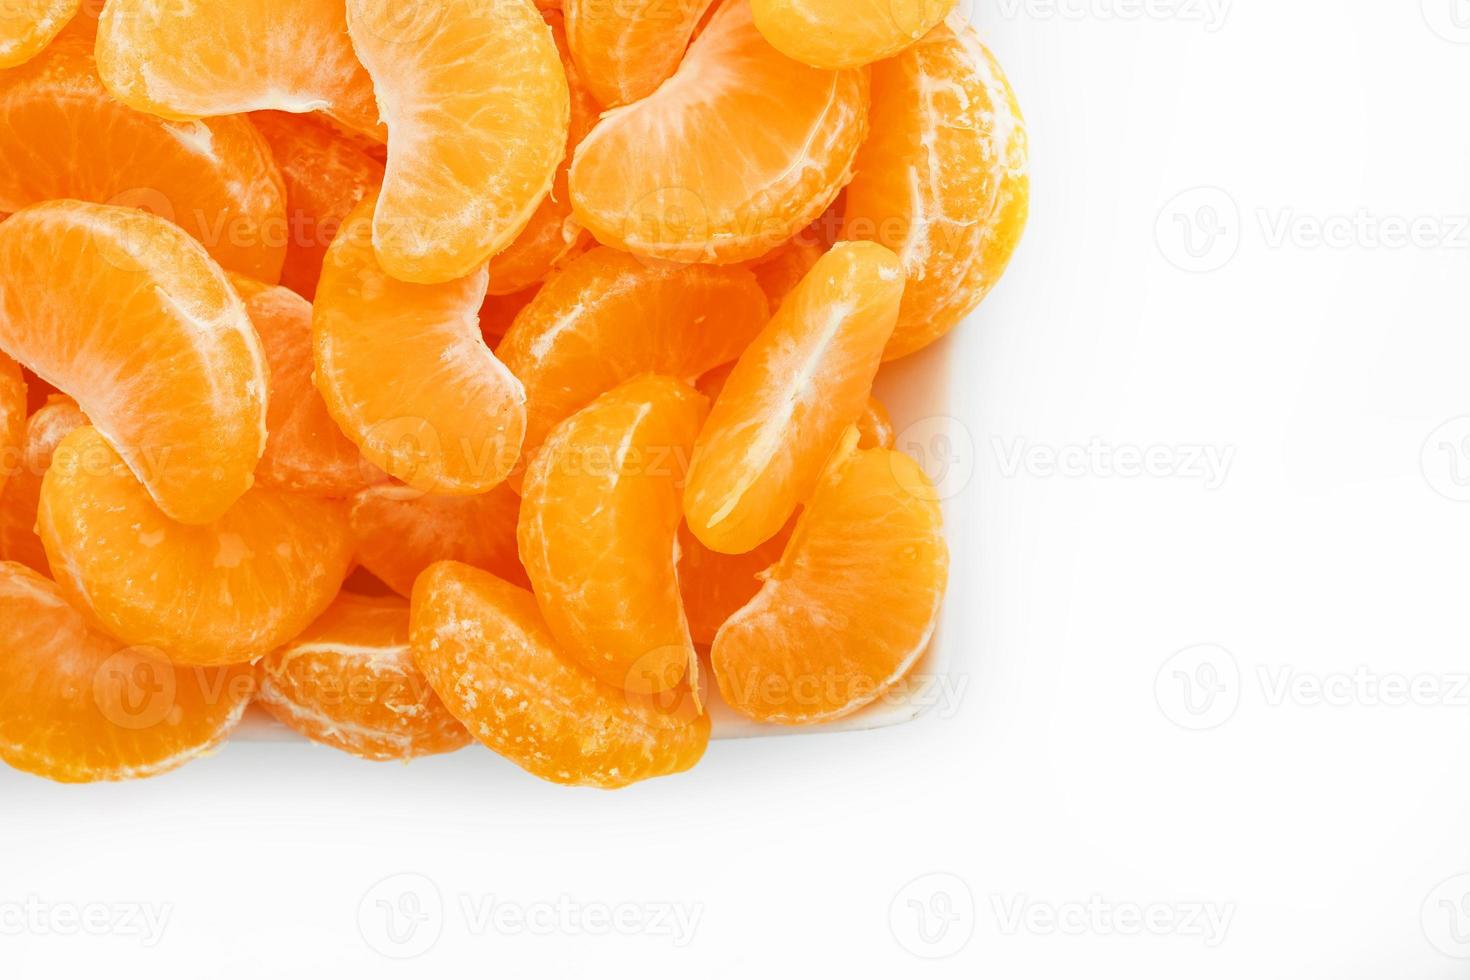 Juicy orange slices of MANDARIN in a rectangular white plate on a white background. Isolate. photo